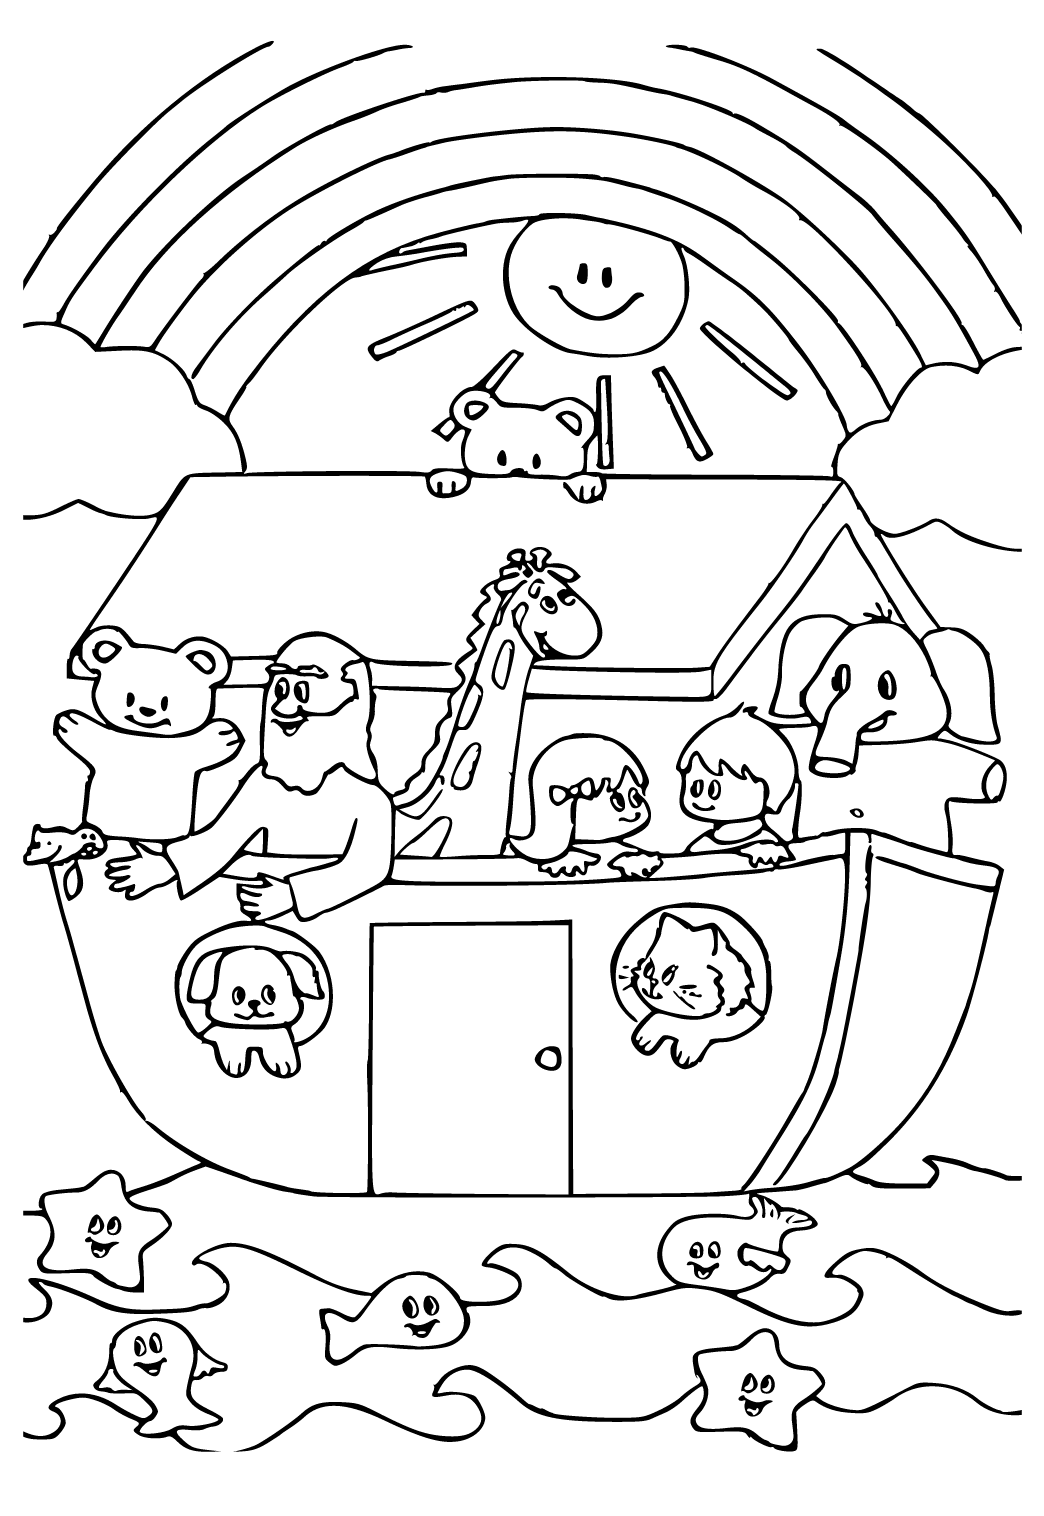 Free printable noahs ark rainbow coloring page for adults and kids